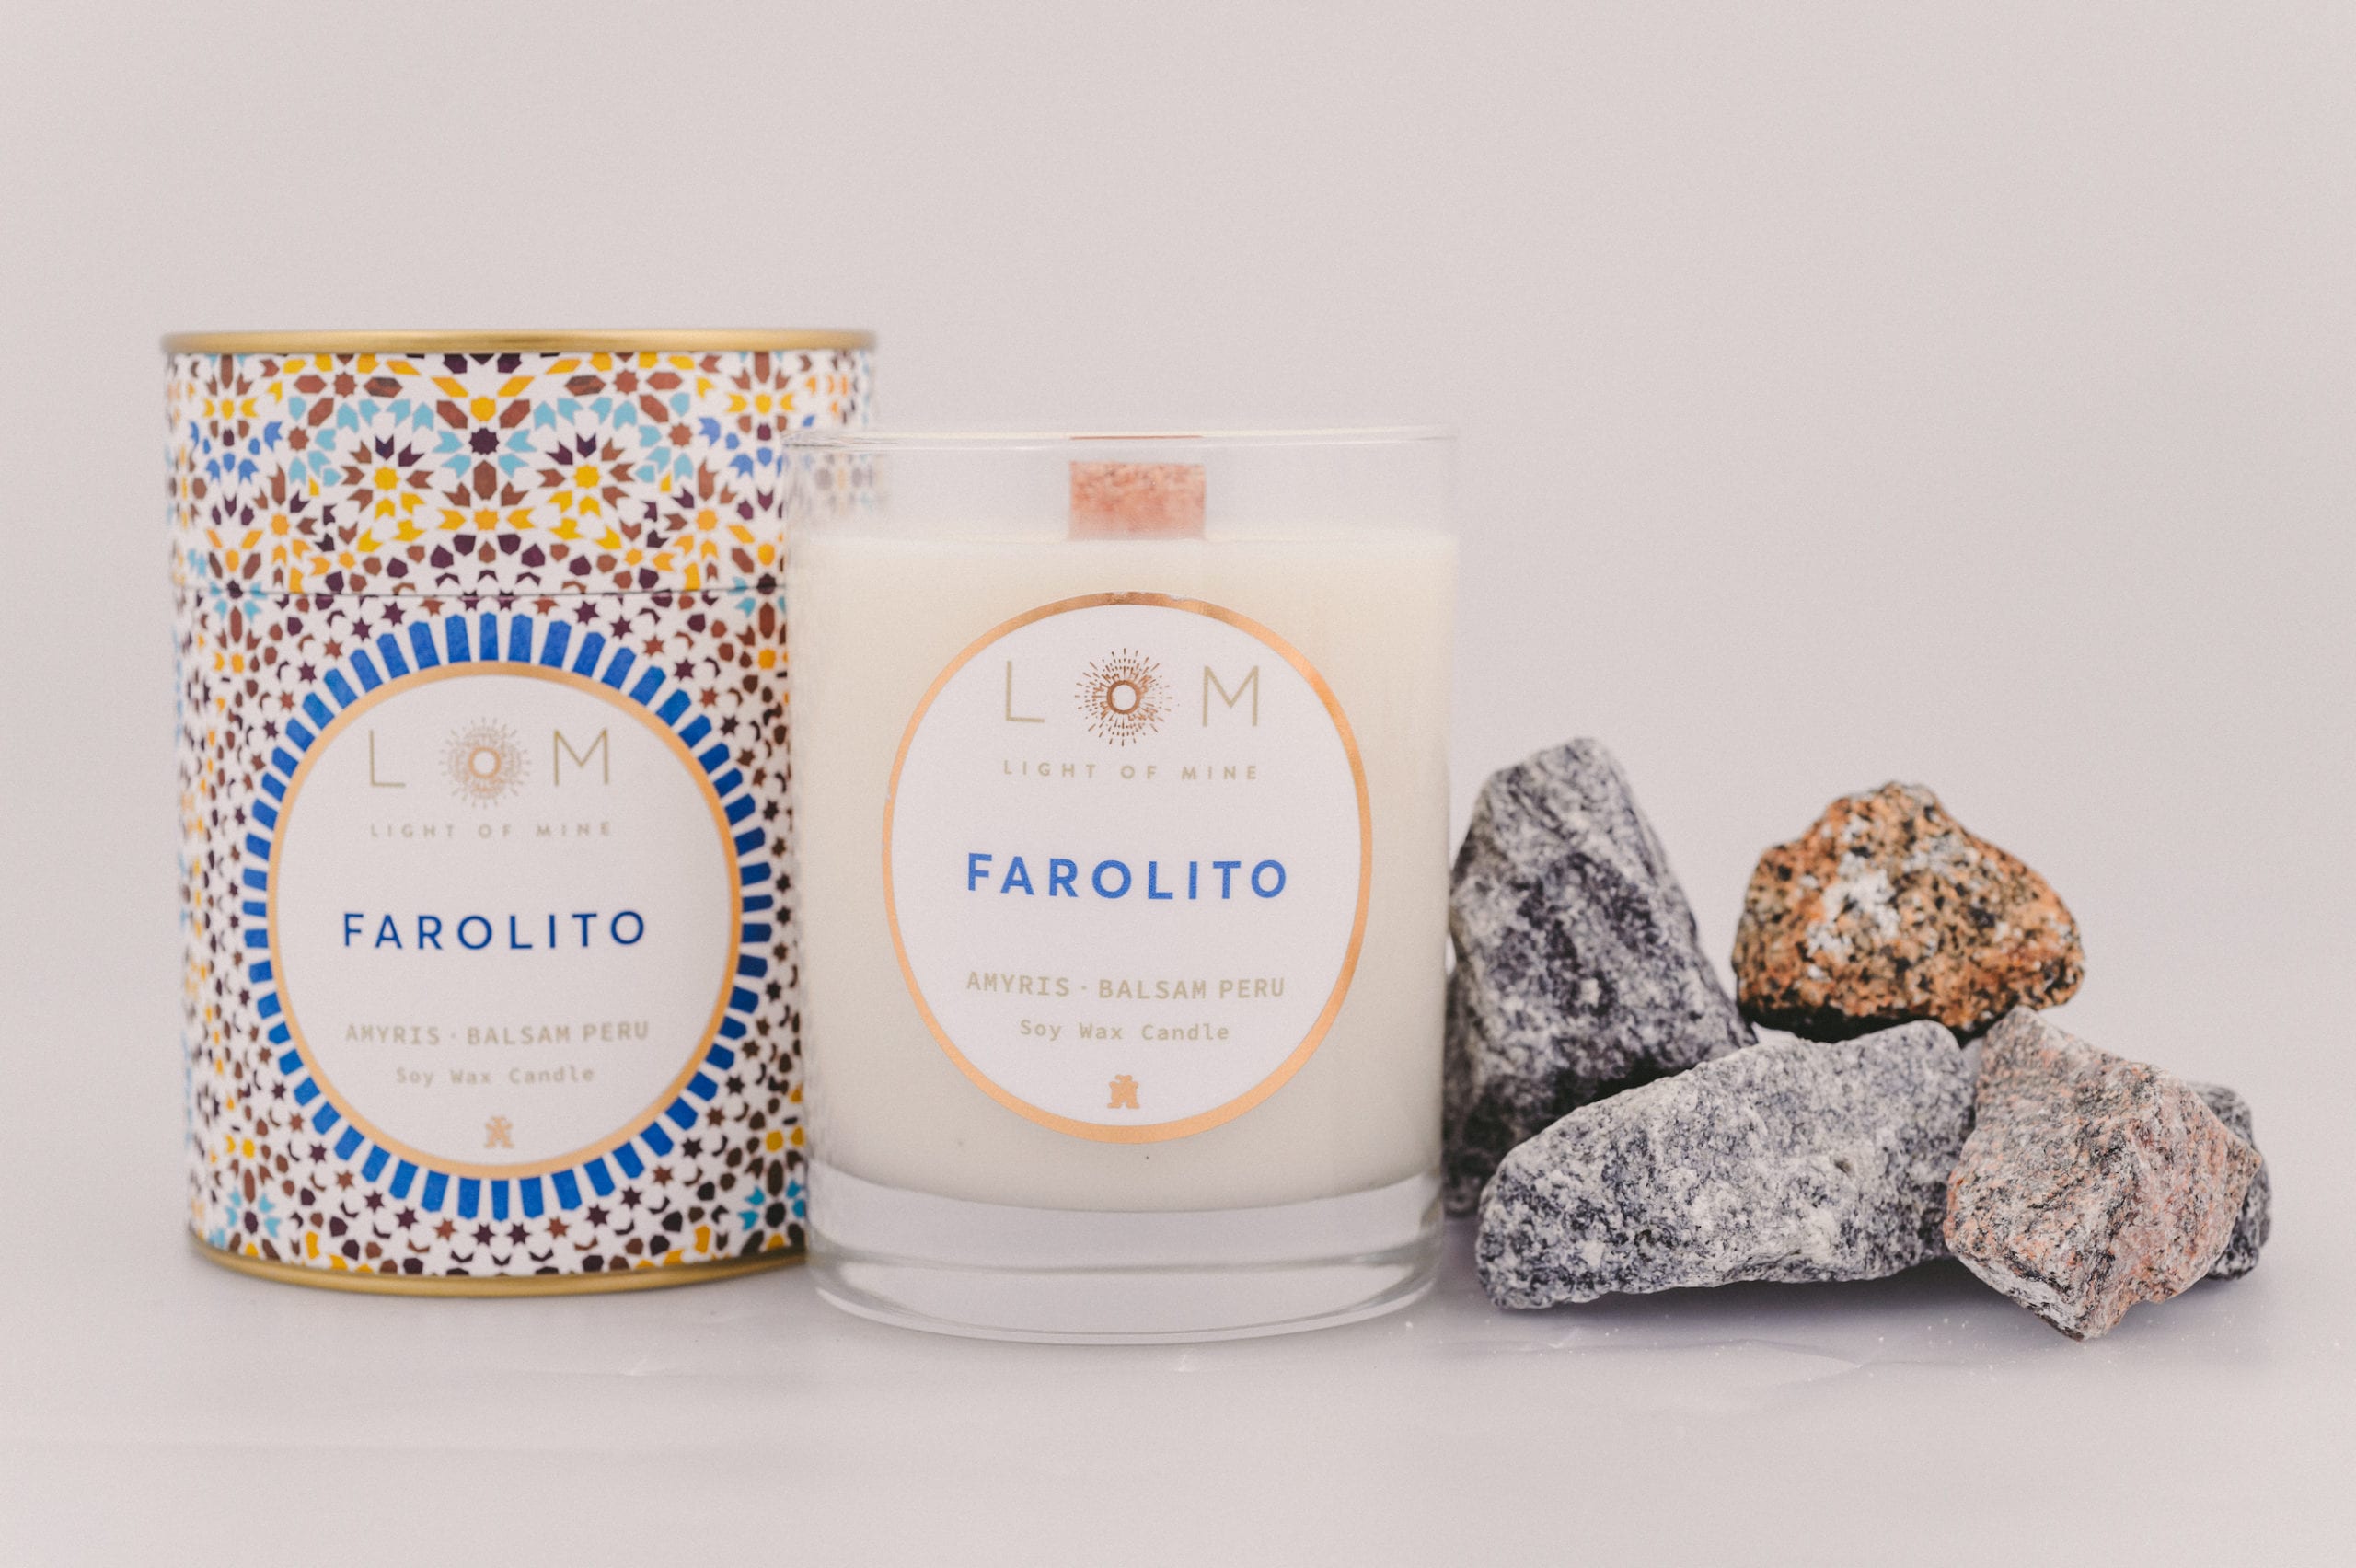 Two Light of Mine Farolito brand with Amyris and Balsam Peru soy wax scented candles next to a few stones